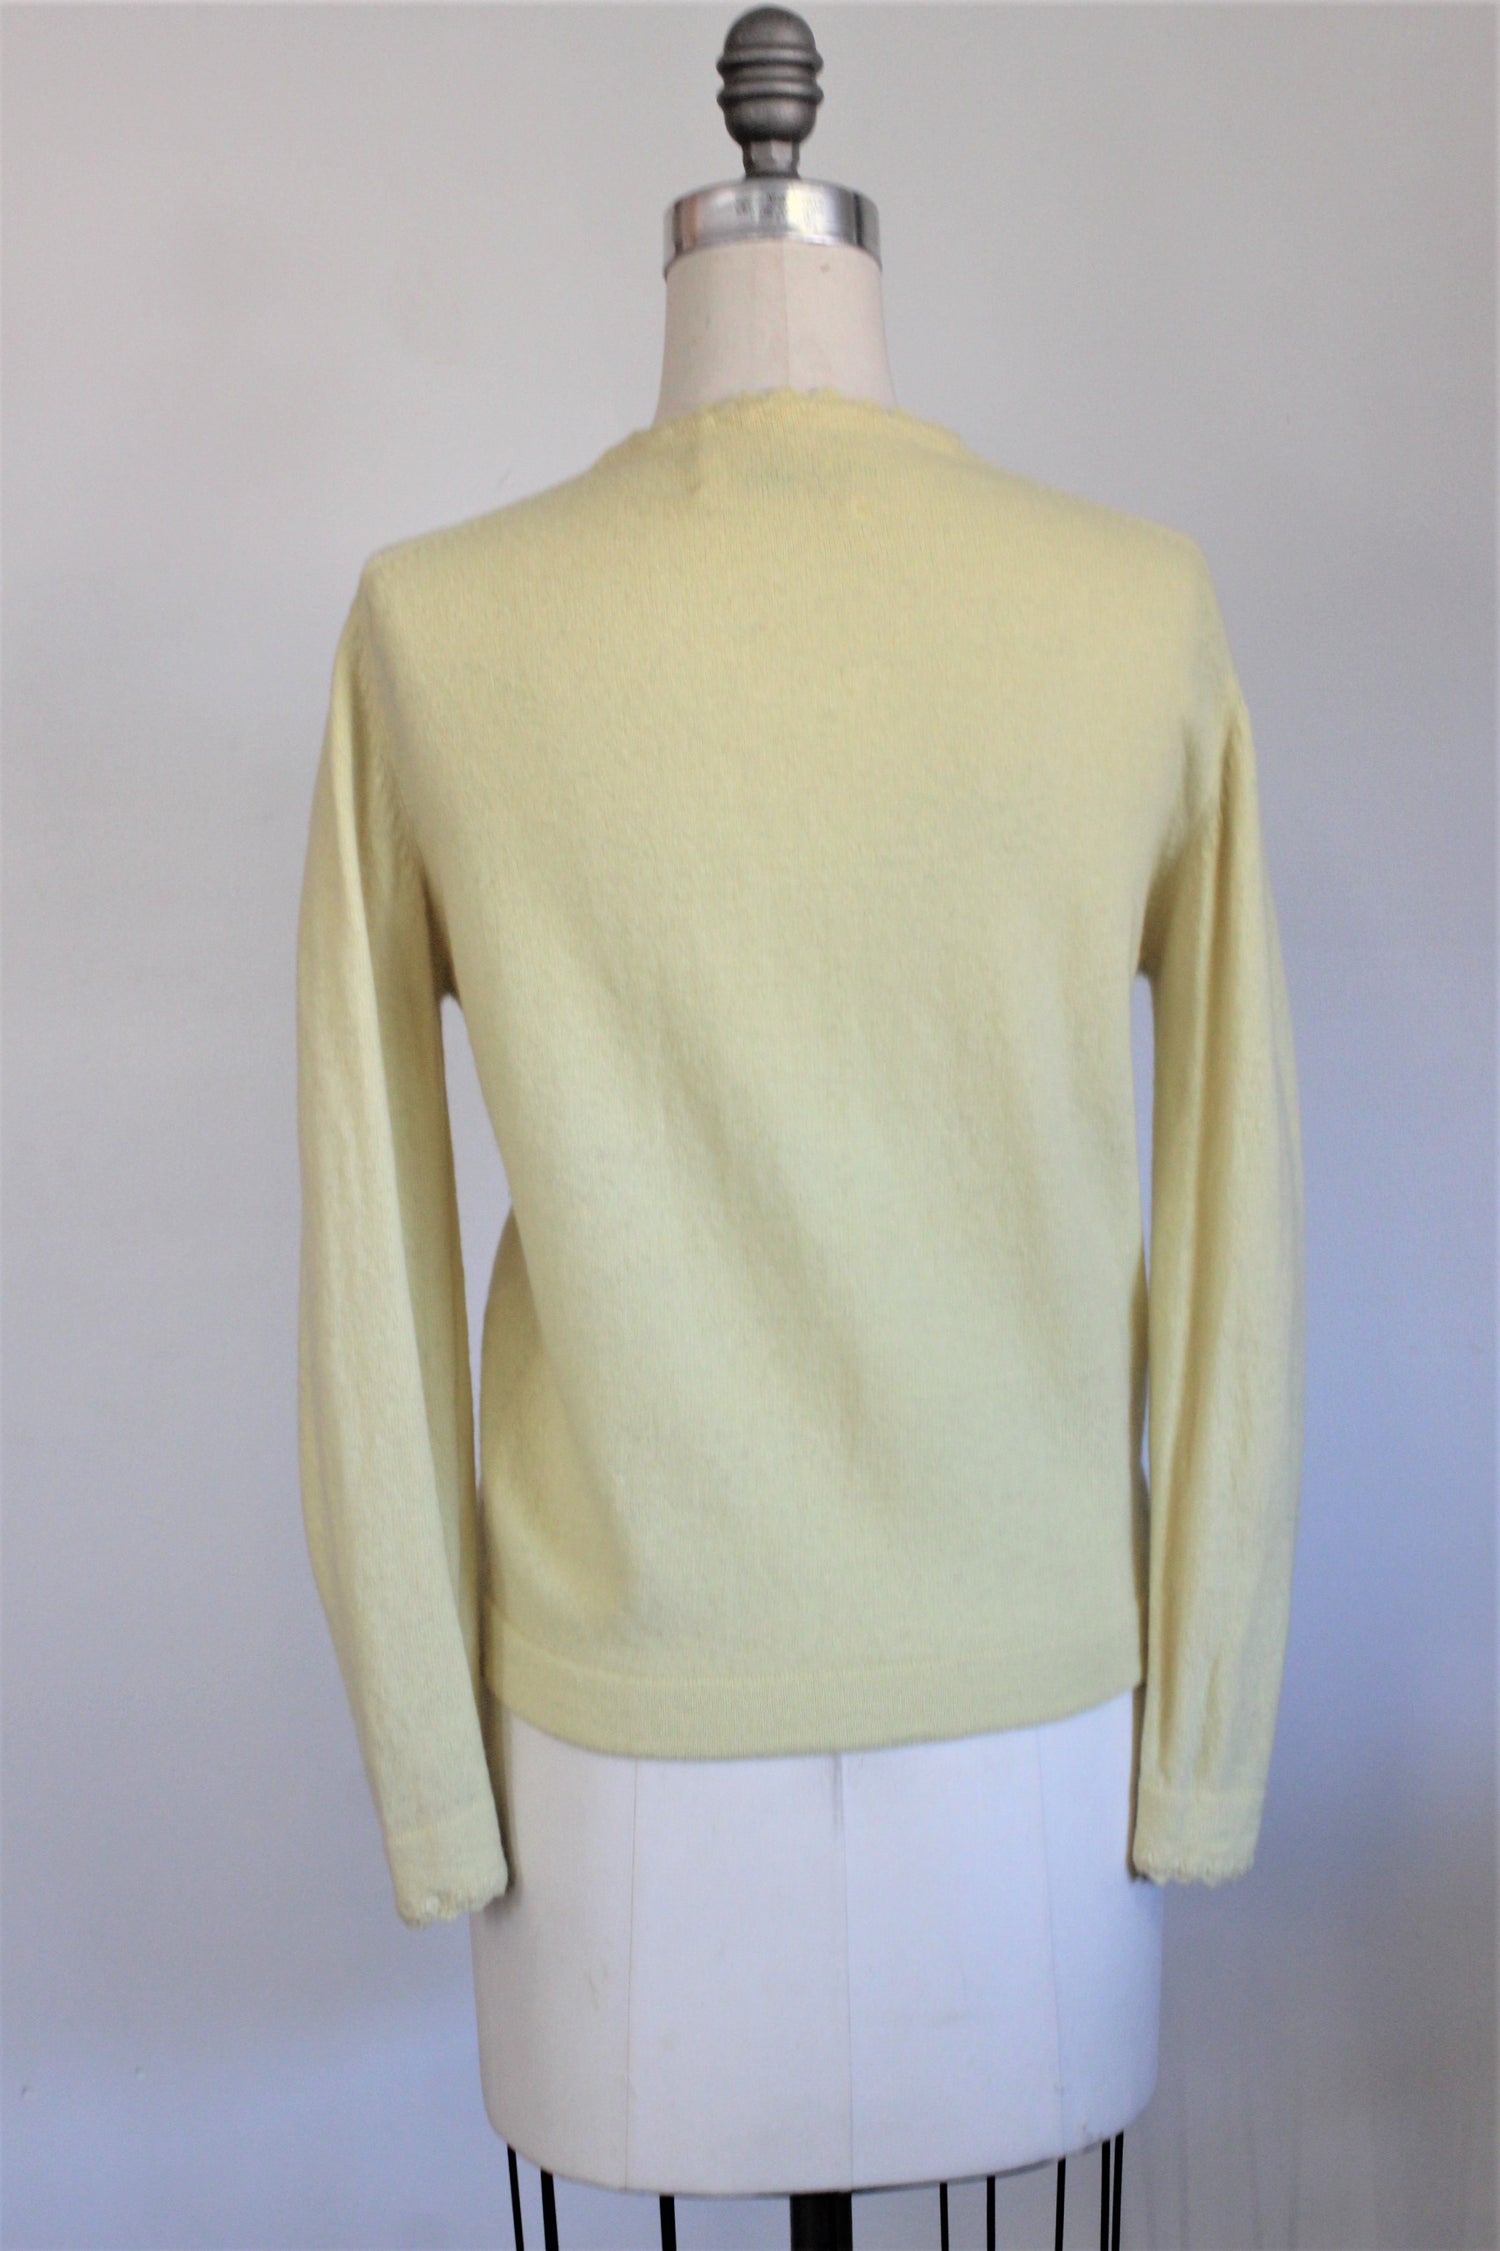 Vintage 1950s Yellow Sweater, Cardigan By Campus Casuals